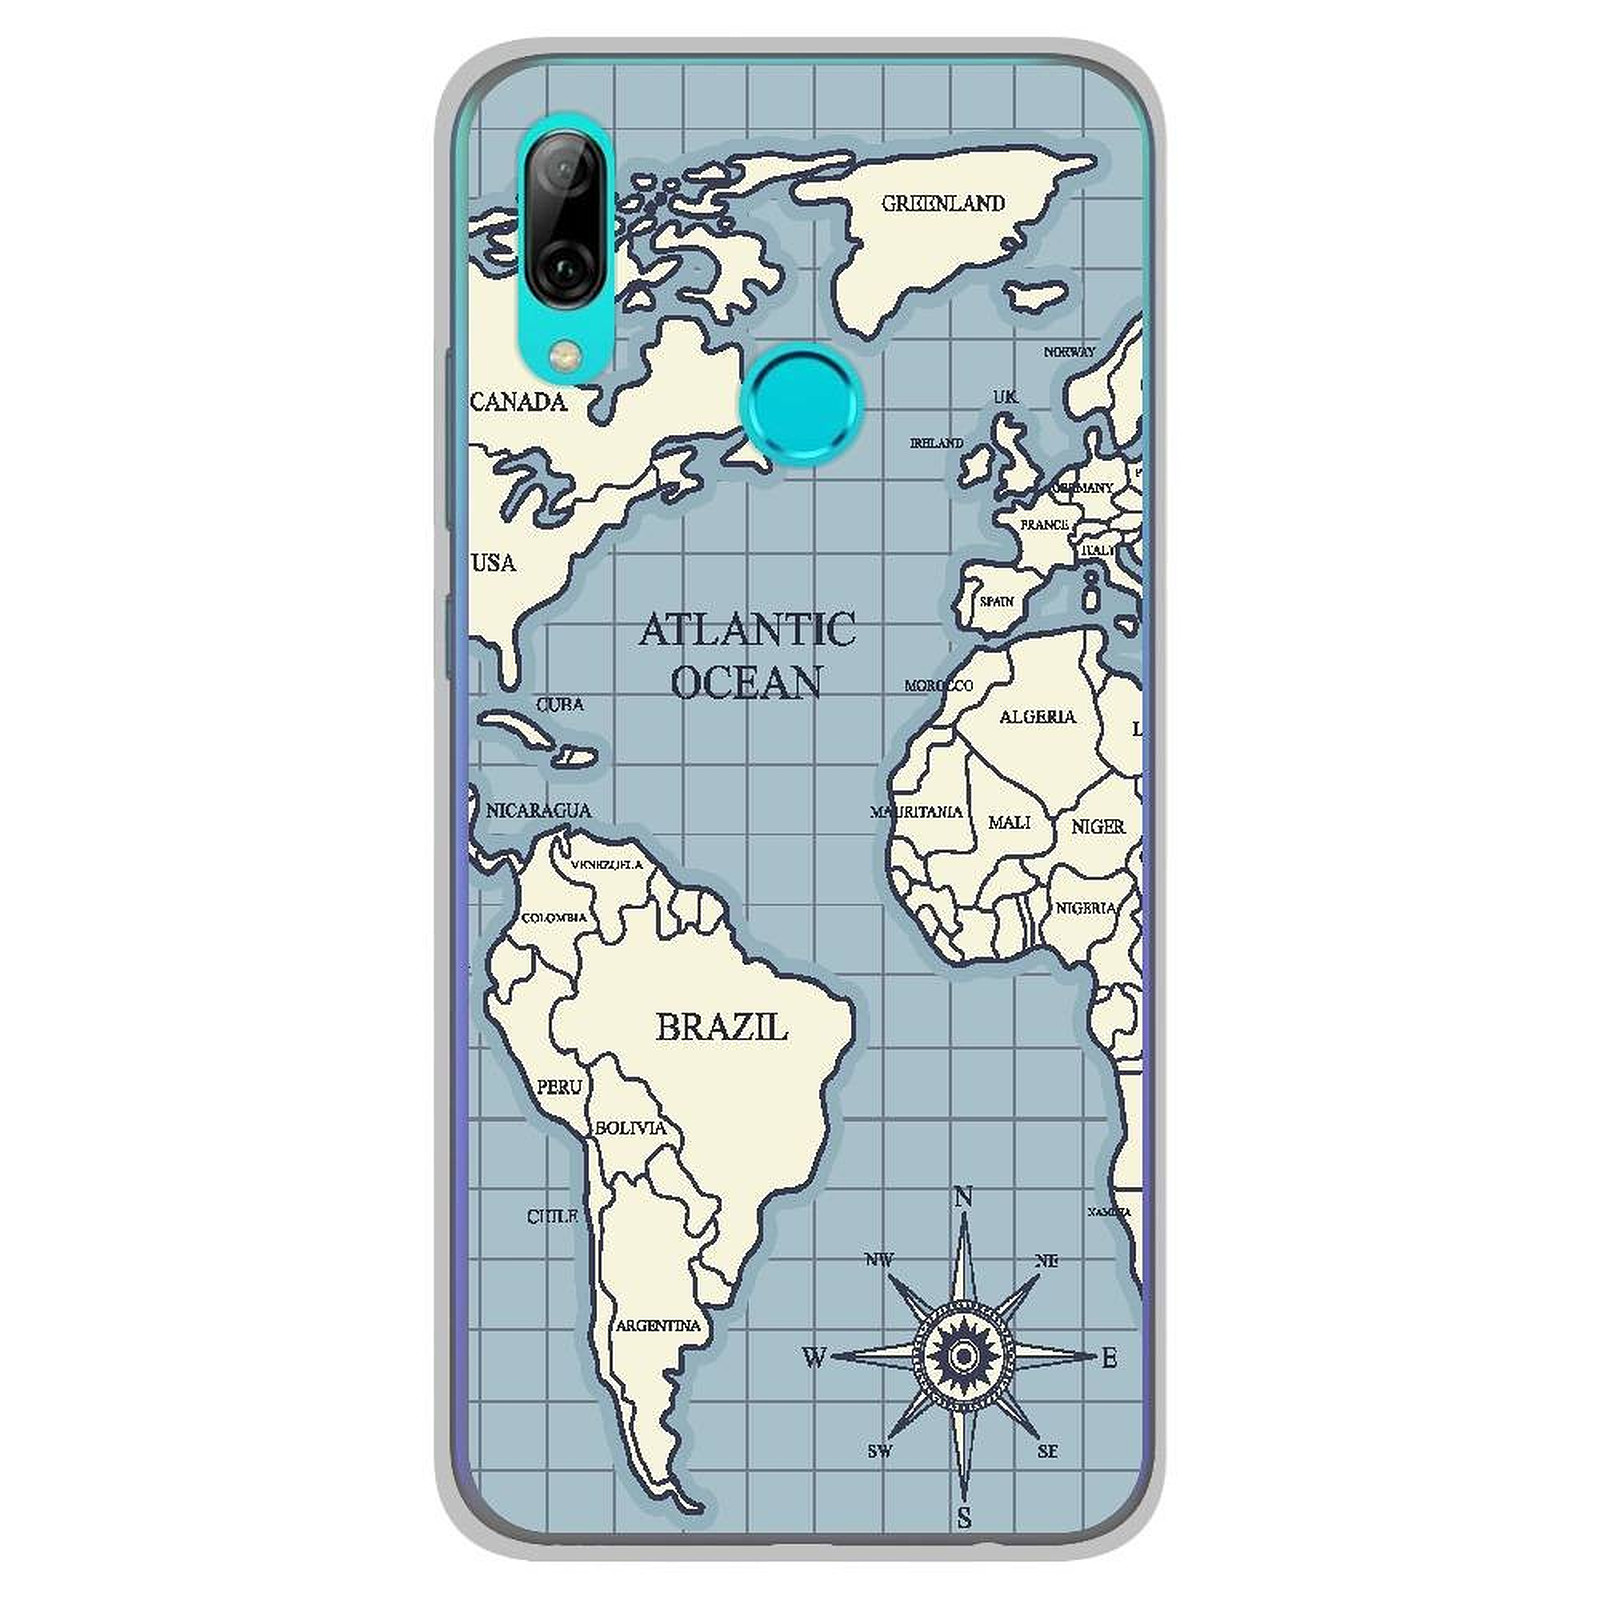 1001 Coques Coque silicone gel Huawei P Smart 2019 motif Map vintage - Coque telephone 1001Coques